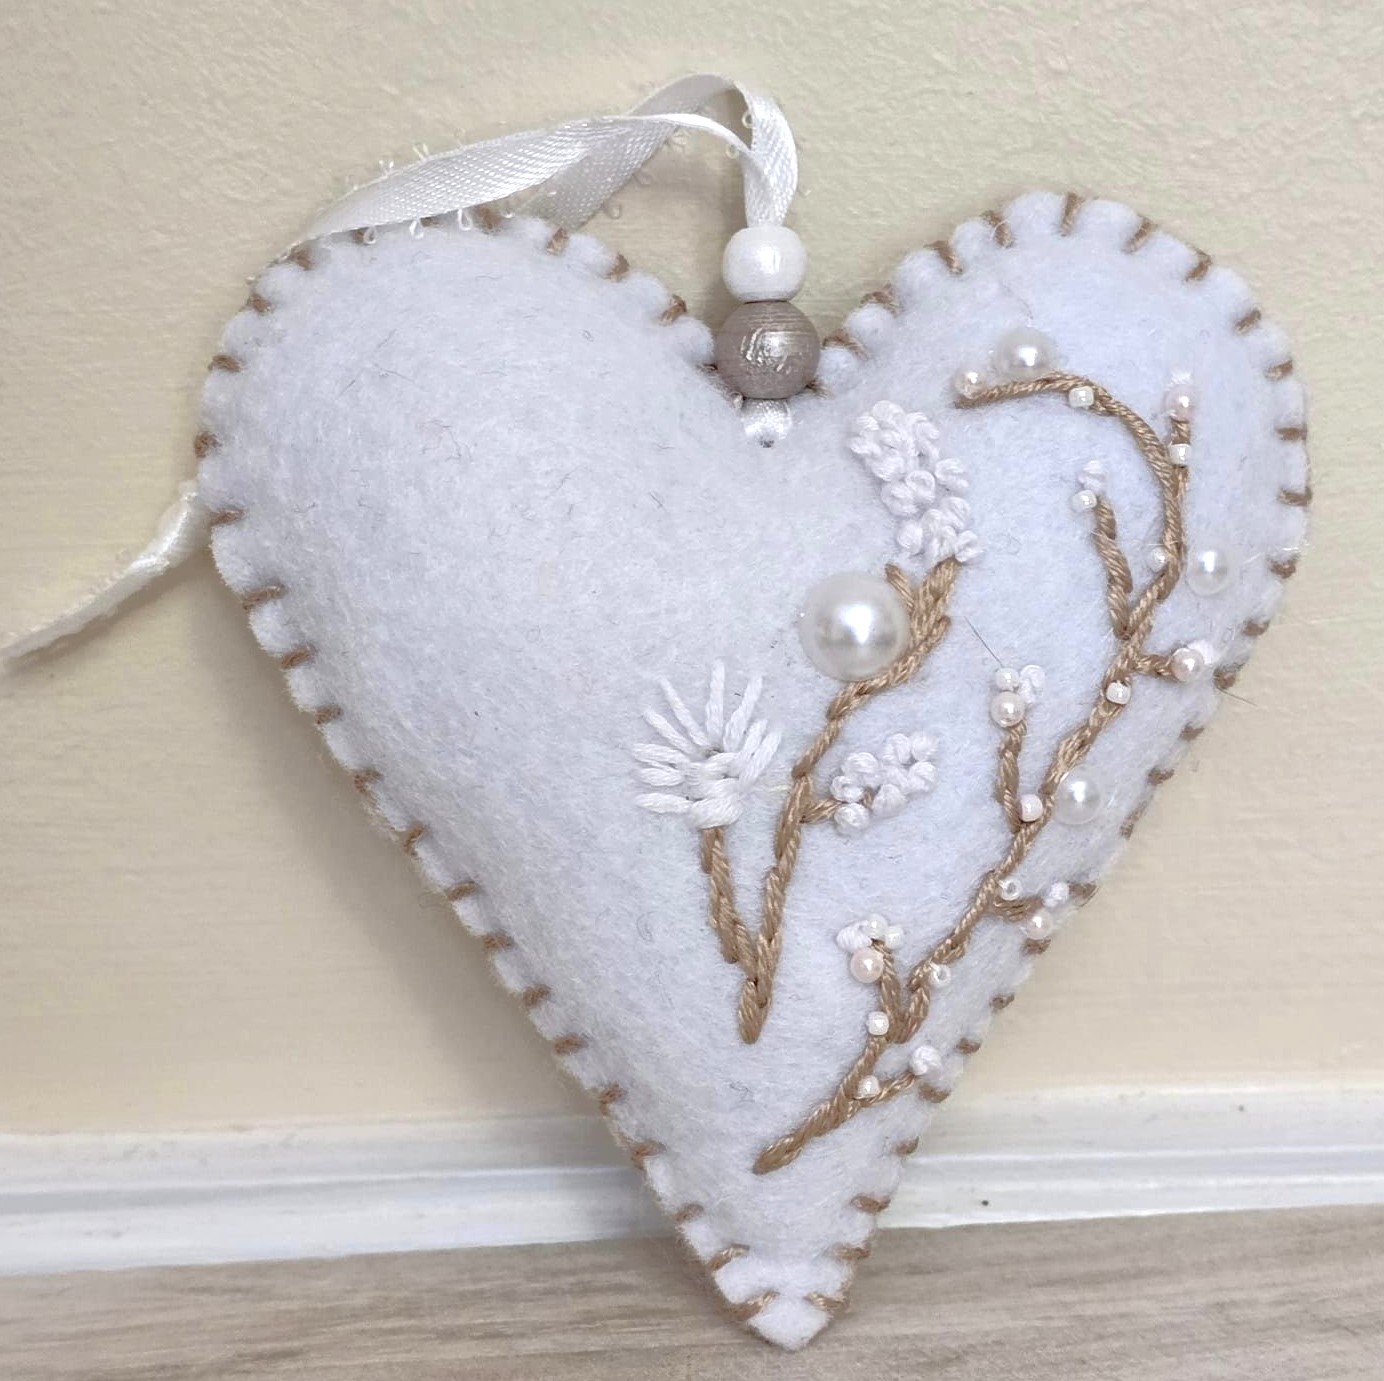 Handmade felt heart ornament, Chic Country ornament, white heart ornament with embroidery and beads - Click Image to Close